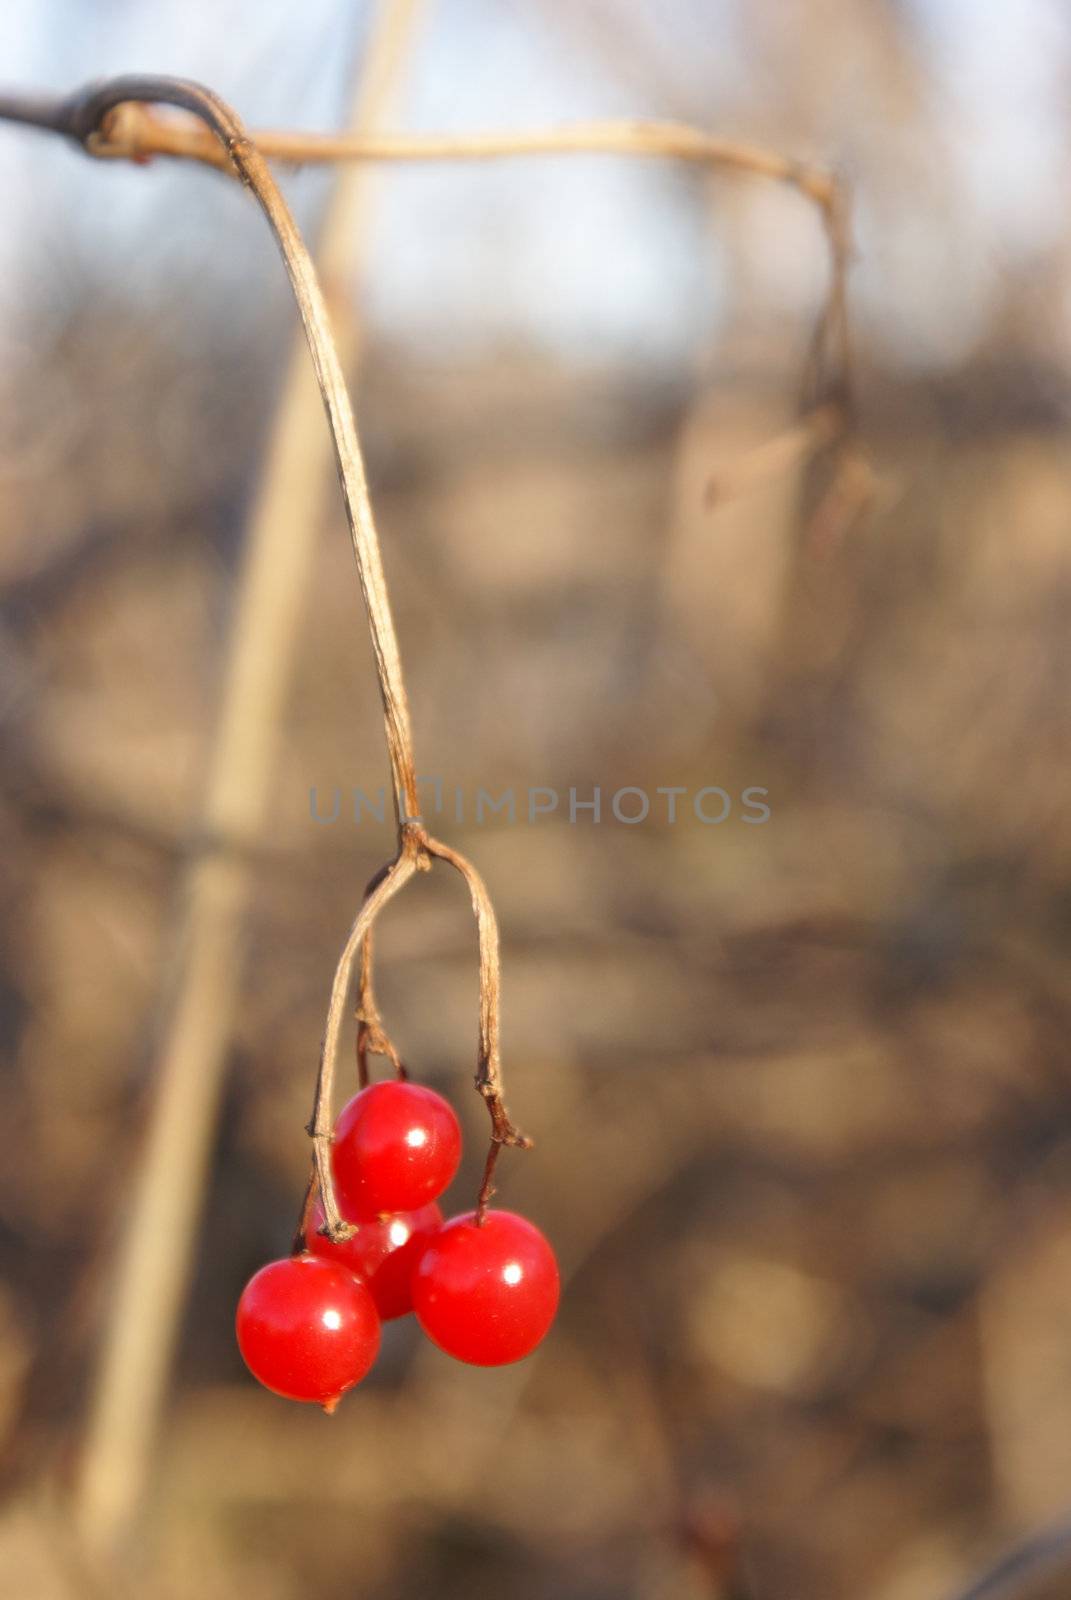 A nature shot of some wild red berries on a contrasting background.